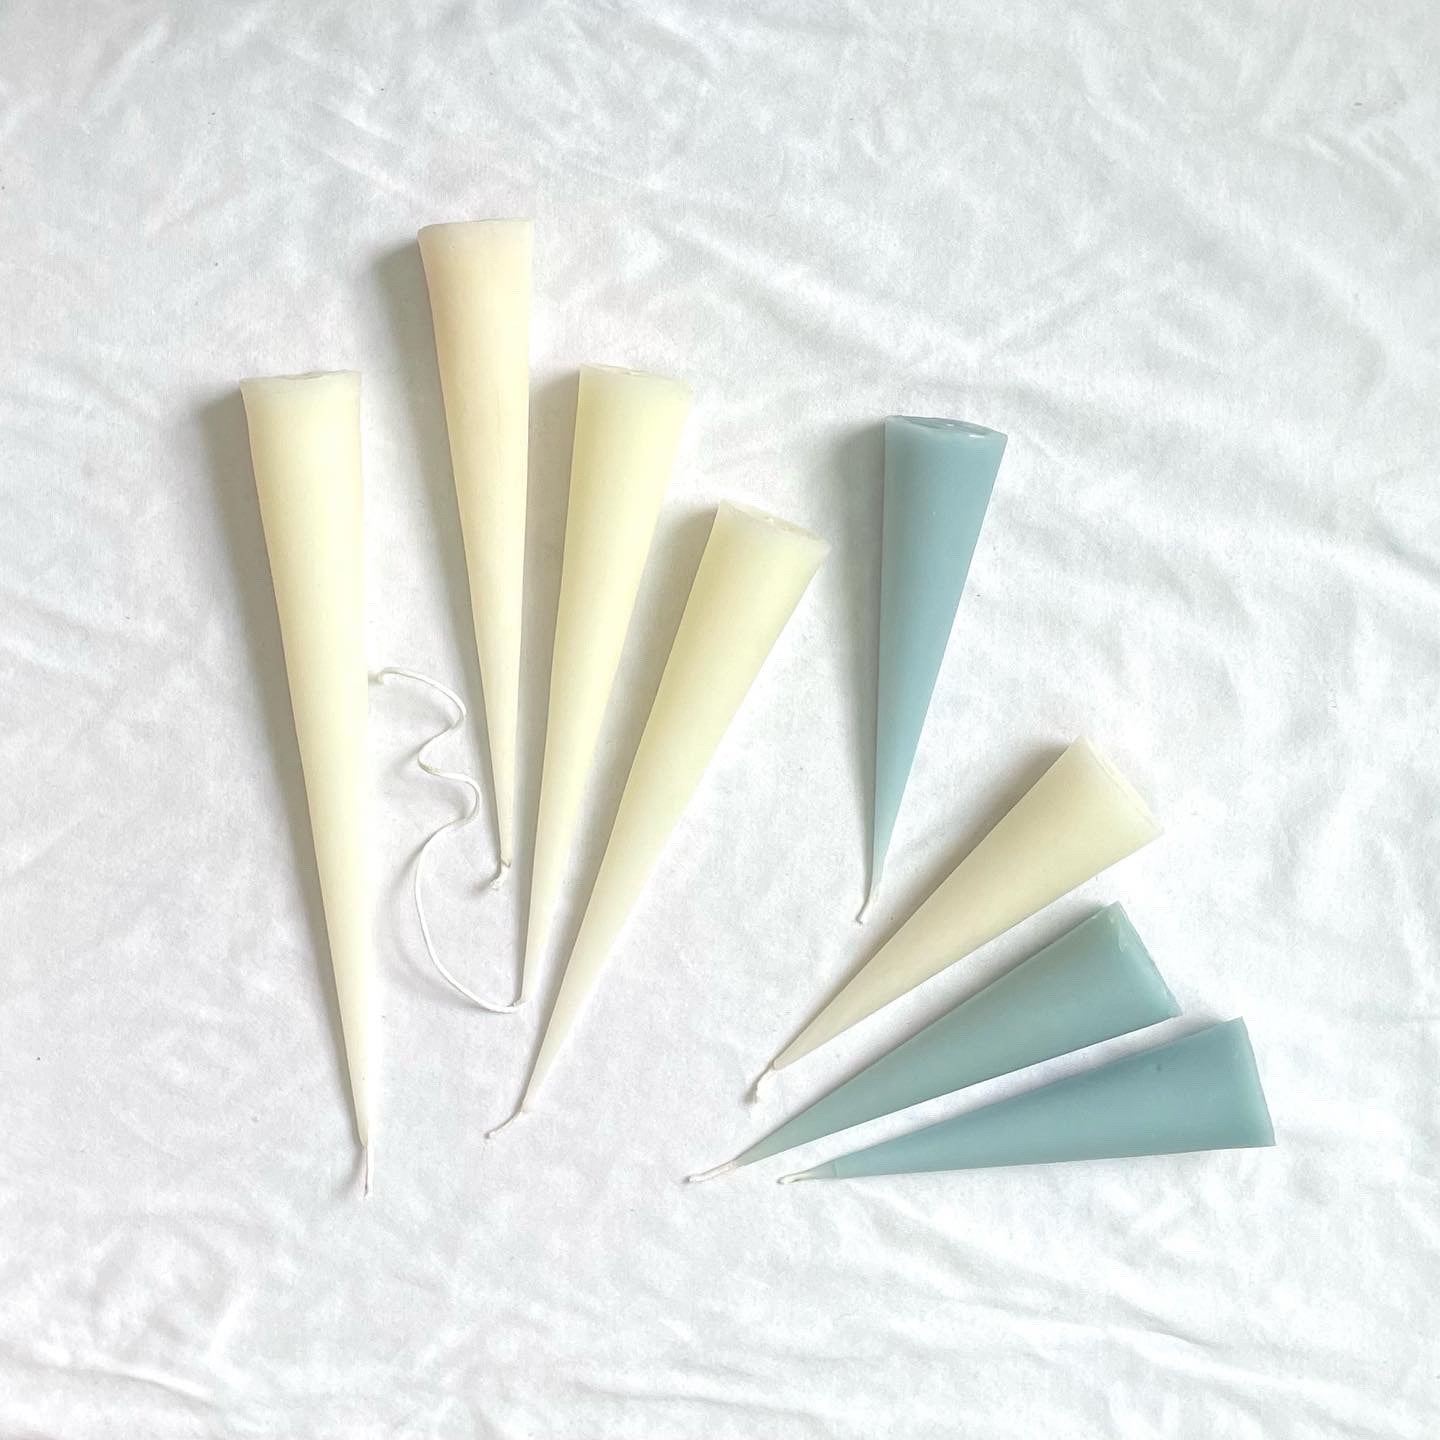 Icicle Beeswax Cones - Light Blue Cone Candle - Beeswax, Candle, Hygge in 6", 8", 10" and 12"